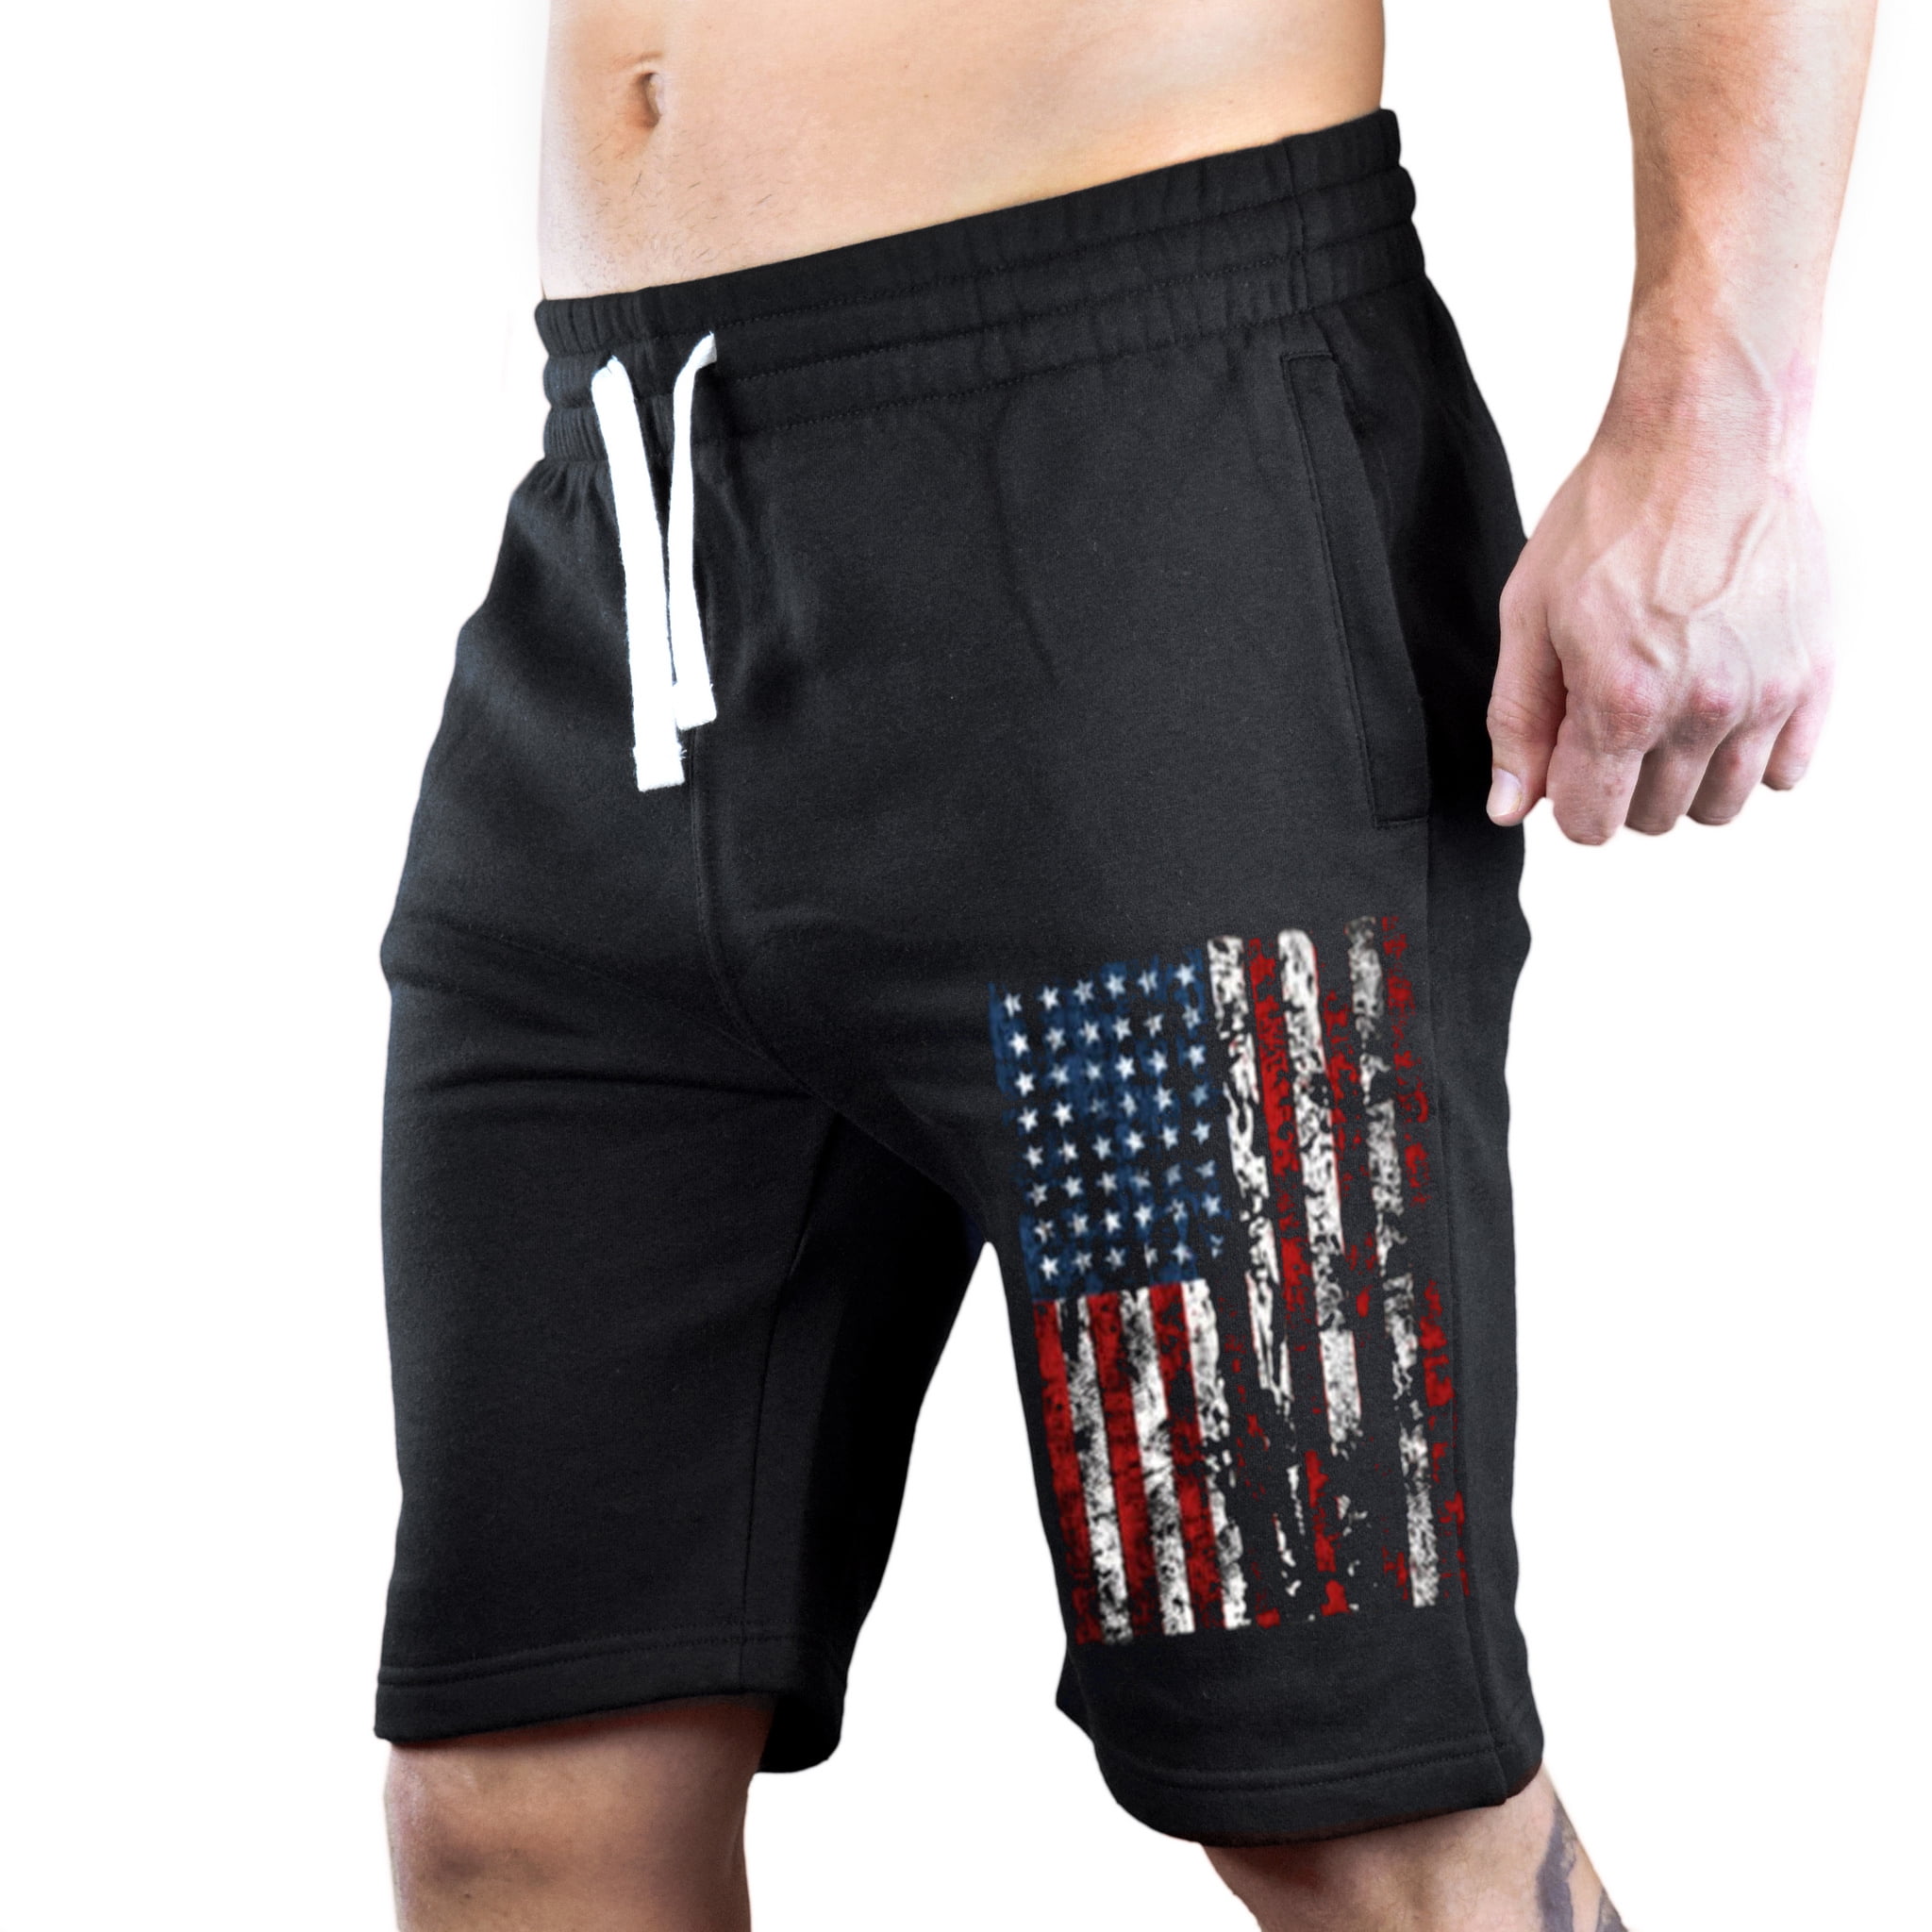 Mens Love Hot Dog Or Youre Wrong KT T137 Black Fleece Jogger Sweatpant Gym Shorts Small Black 